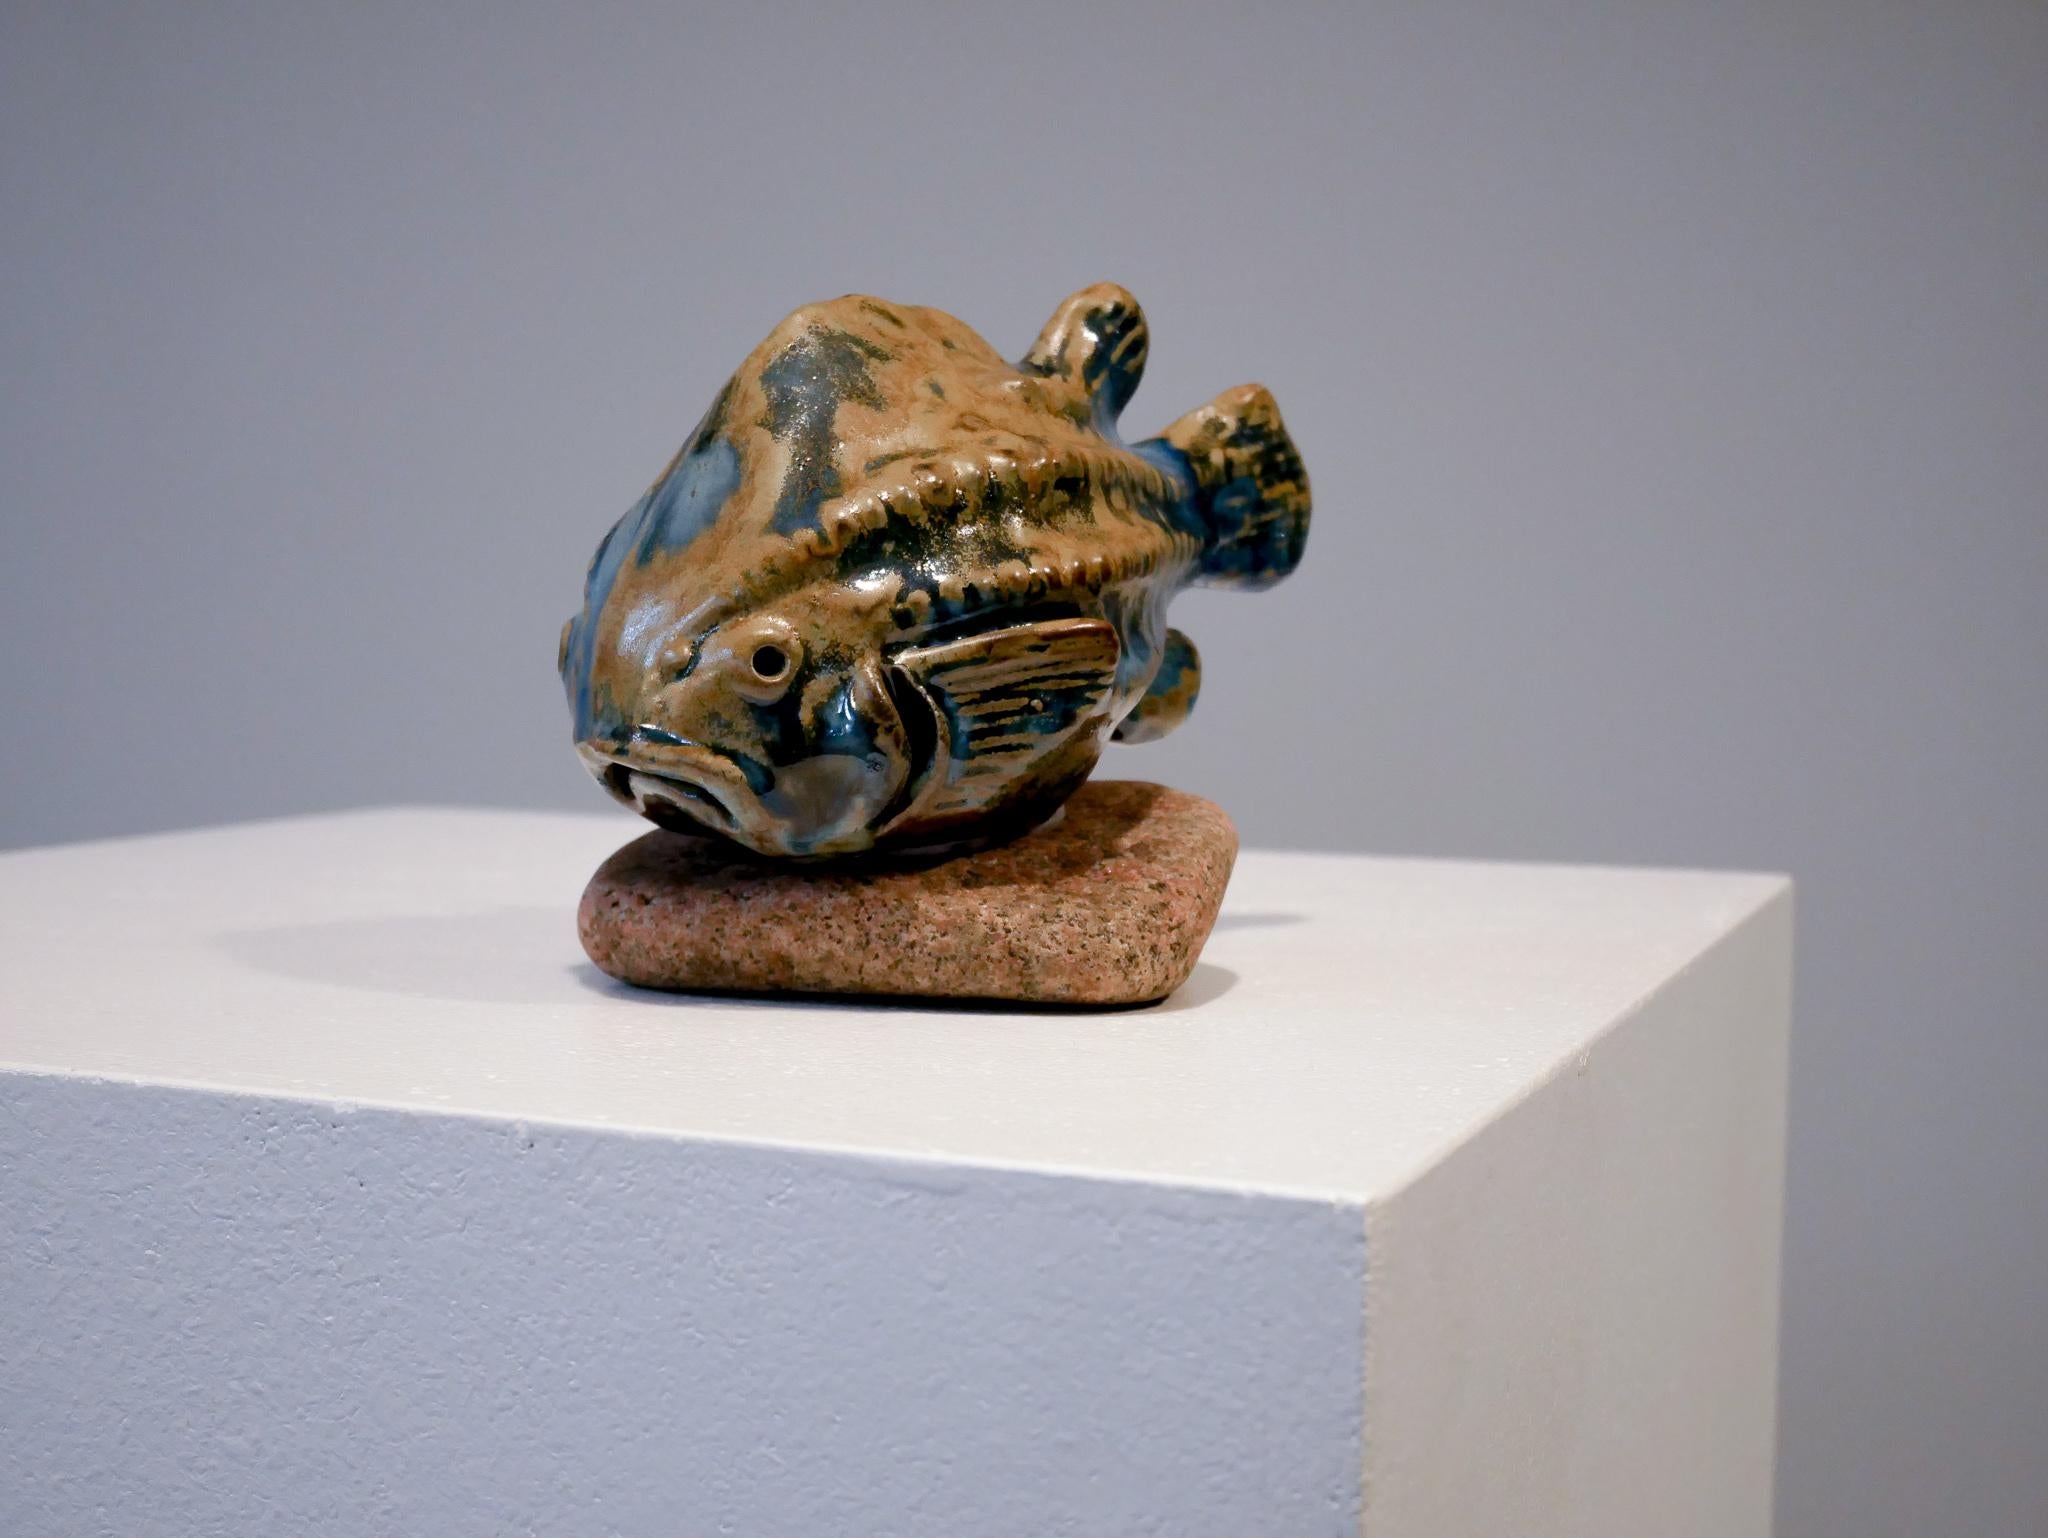 The lumpfish by Engqvist, Råå ceramic studio, Sweden. This is a rare blue colored edition.